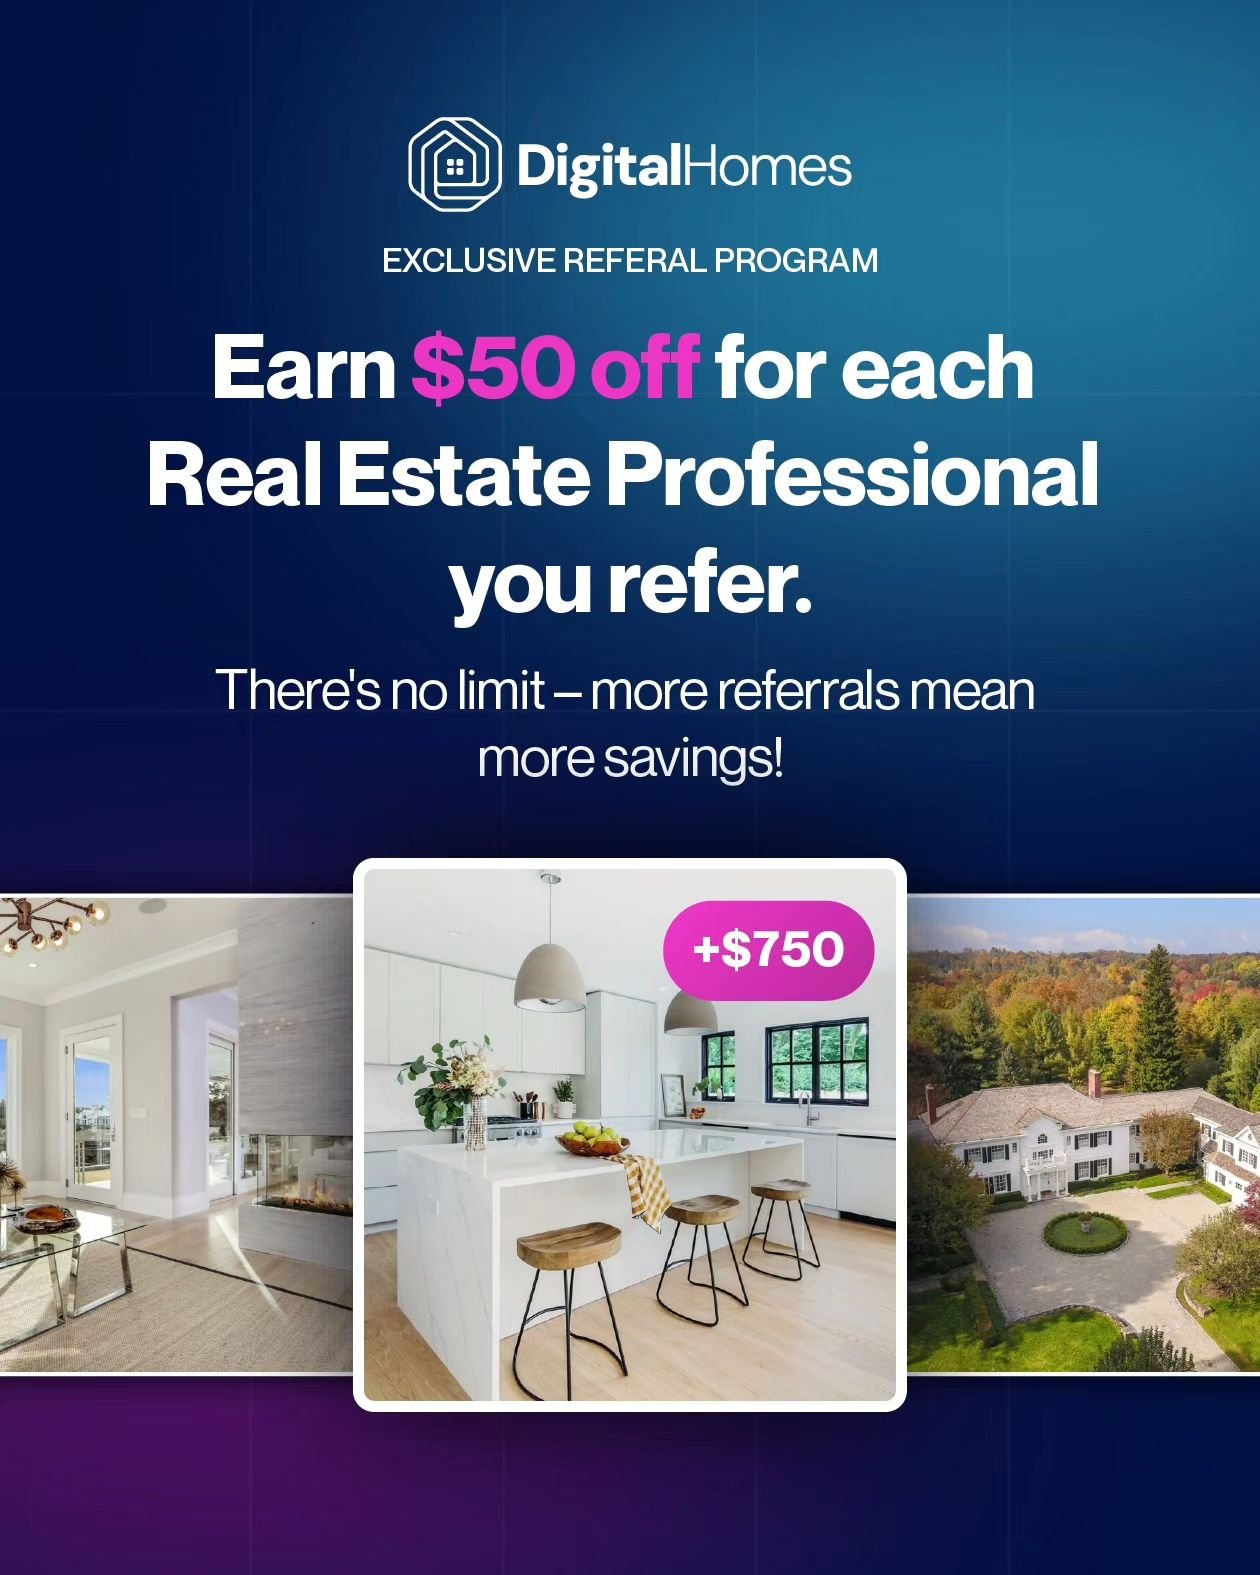 🎉 Exciting News! We're thrilled to announce our new Referral Program! Refer a real estate professional to Digital Homes and enjoy $50 off your next order. It's our way of saying thanks for spreading the word. Keep referring, keep saving! It&rsquo;s 